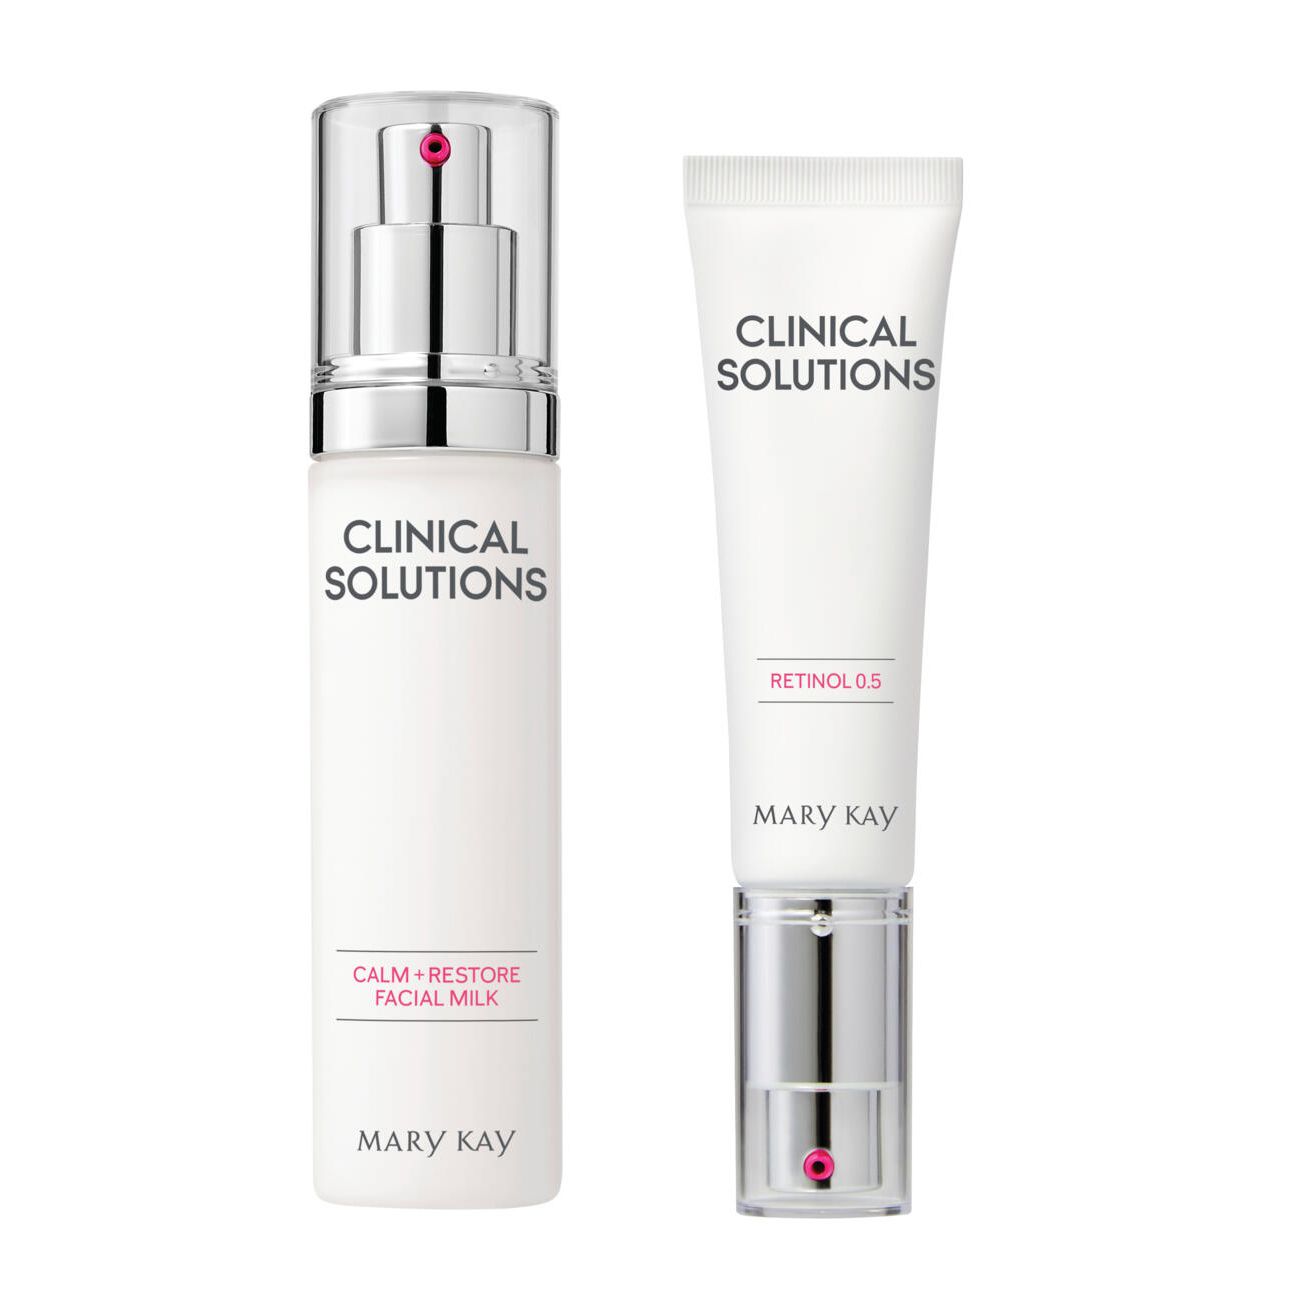 Mary Kay Clinical Solutions Retinol 0.5 Set